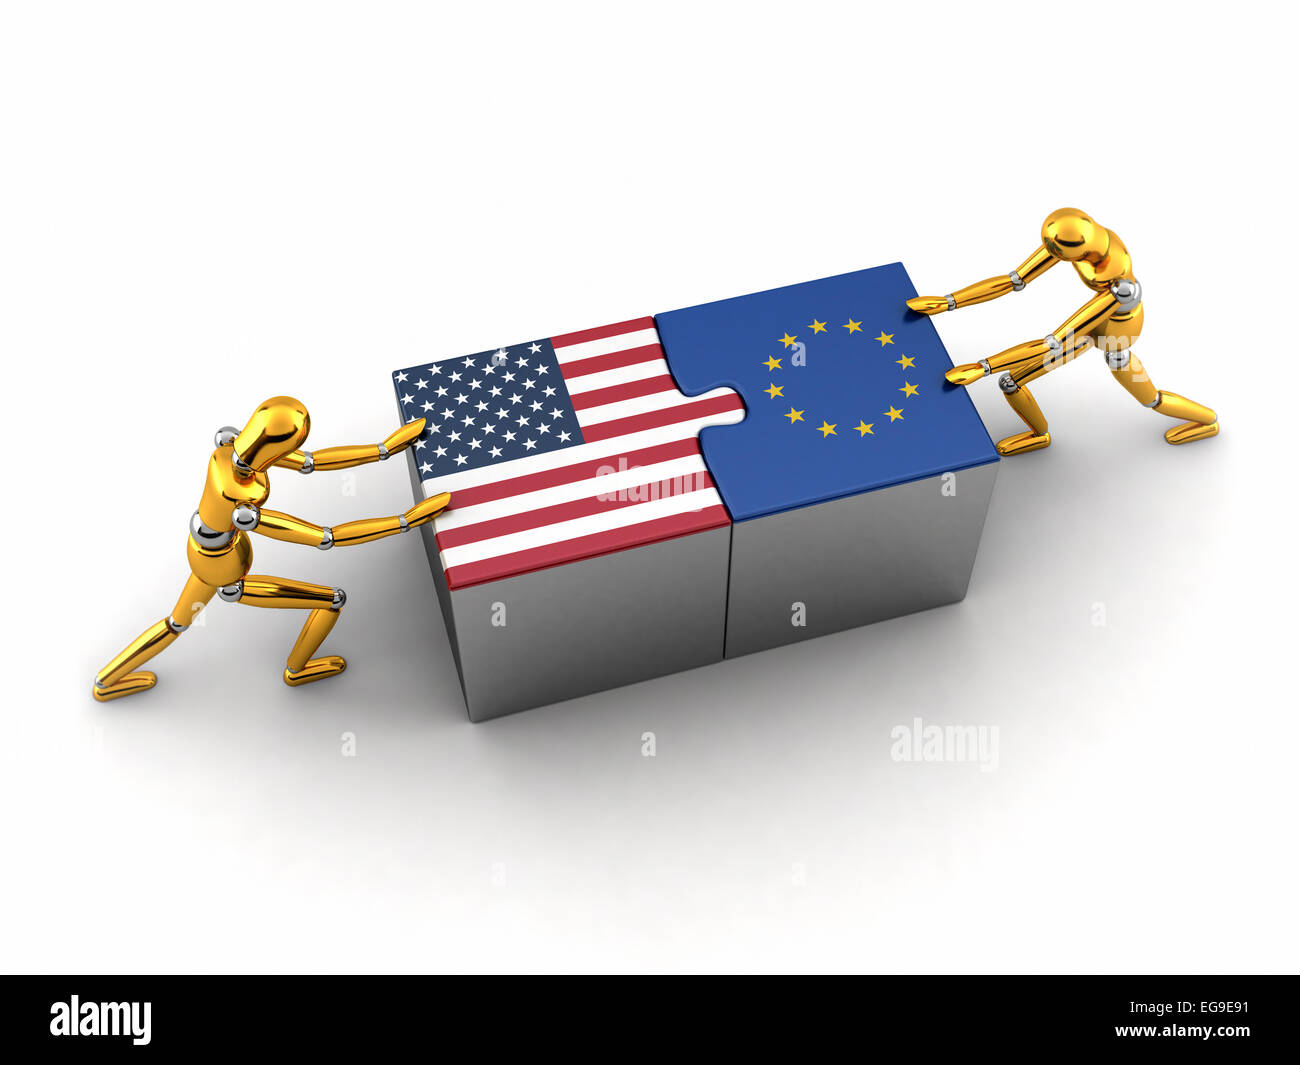 Political or financial concept of the USA struggling and finding a solution with the European union. Stock Photo